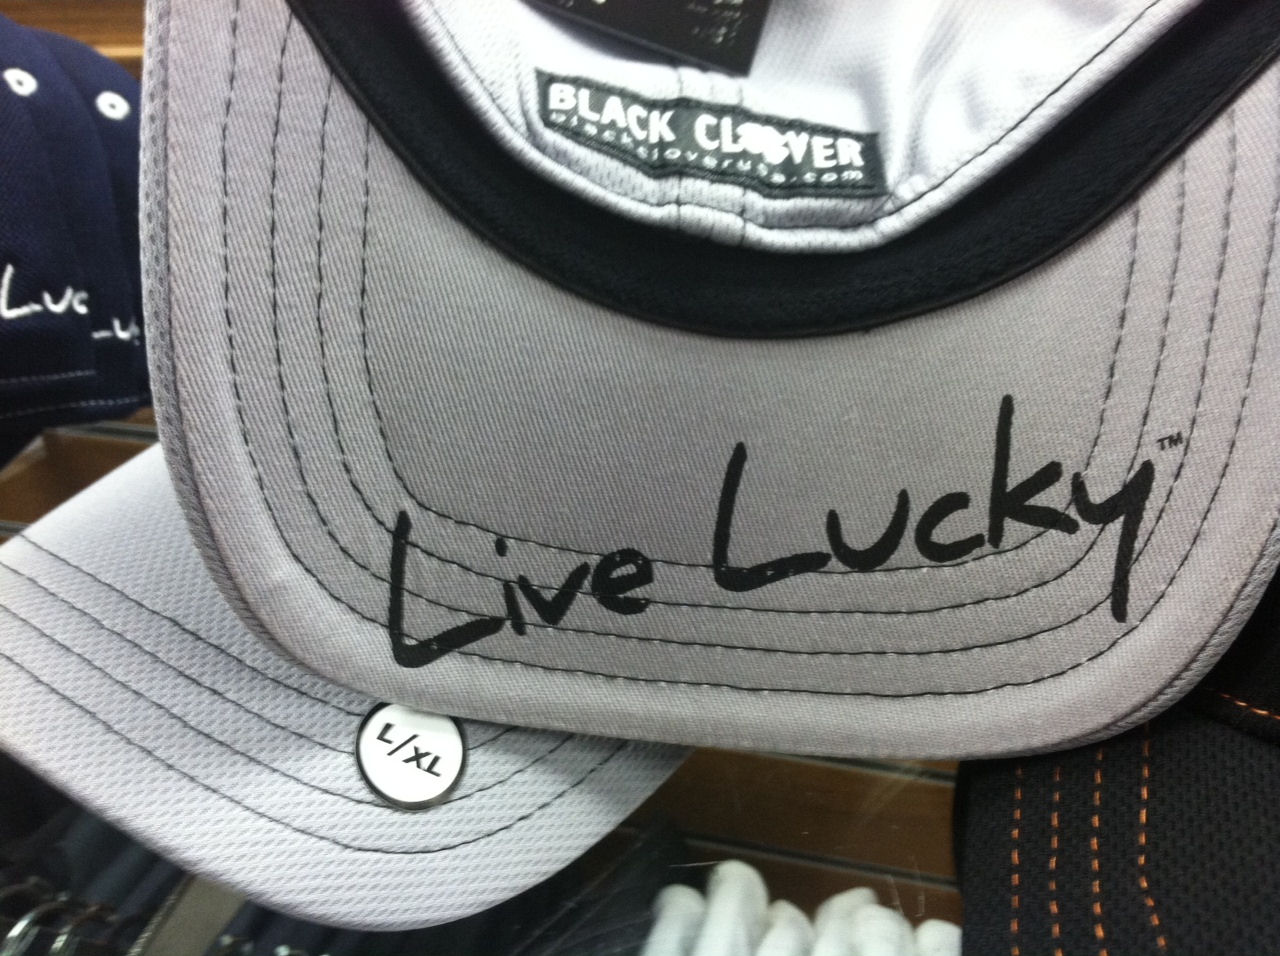 Live Lucky with our New Black Clover Headwear - Haggin Oaks